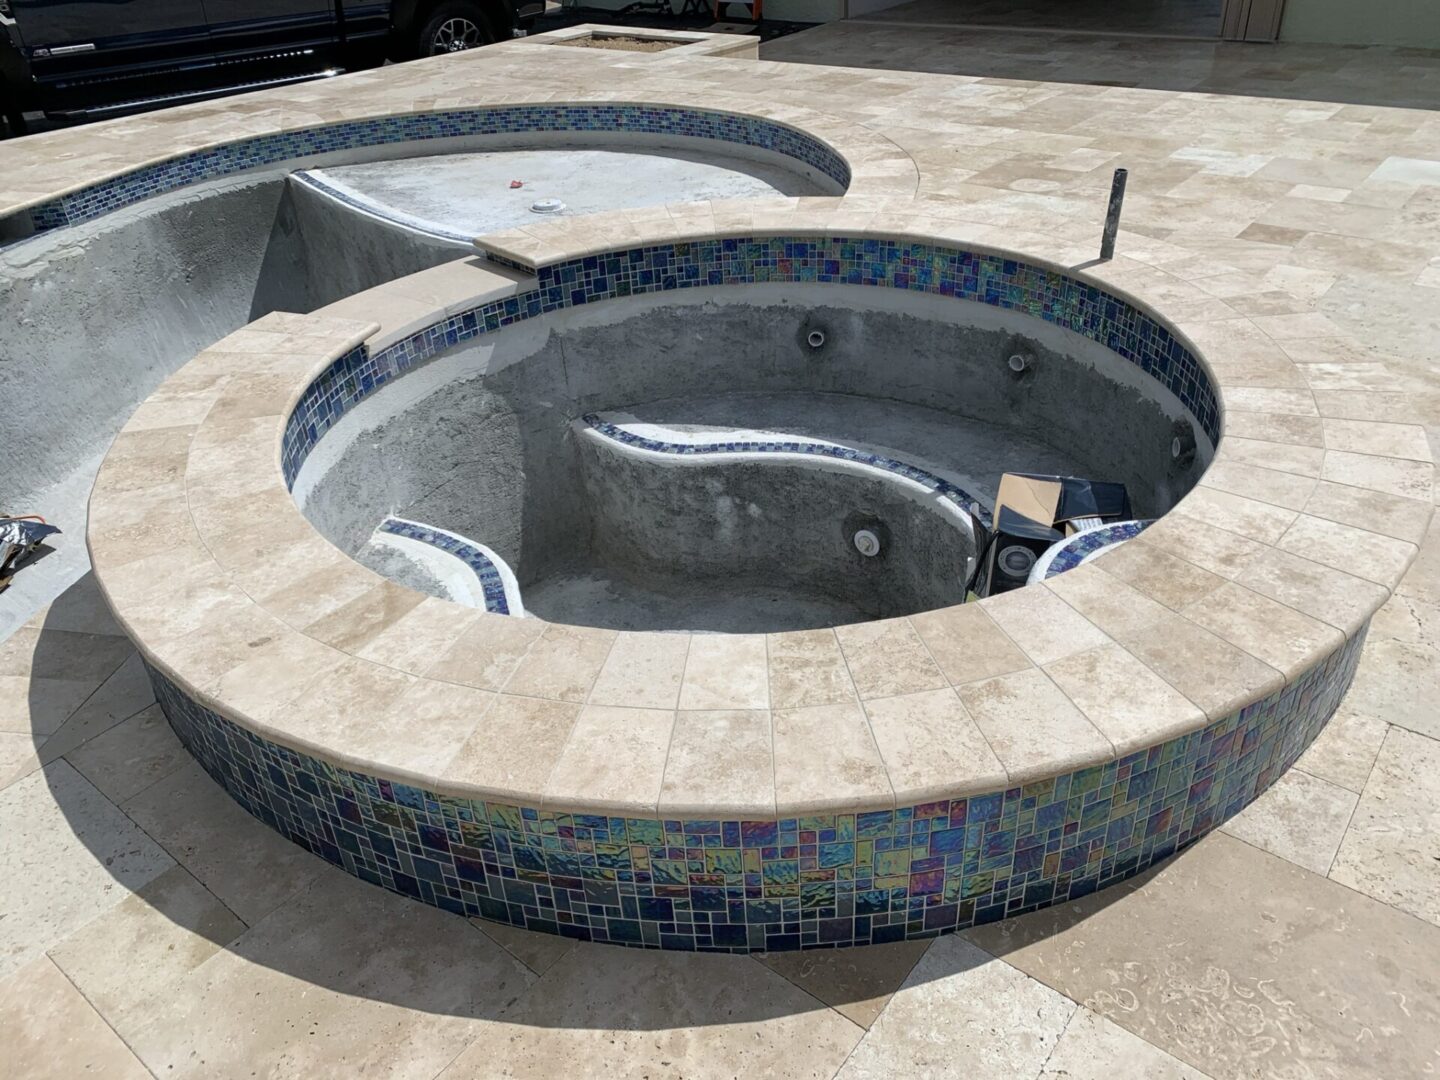 An empty, unfinished circular pool lined with square blue and green mosaic tiles is being constructed on a paved area.